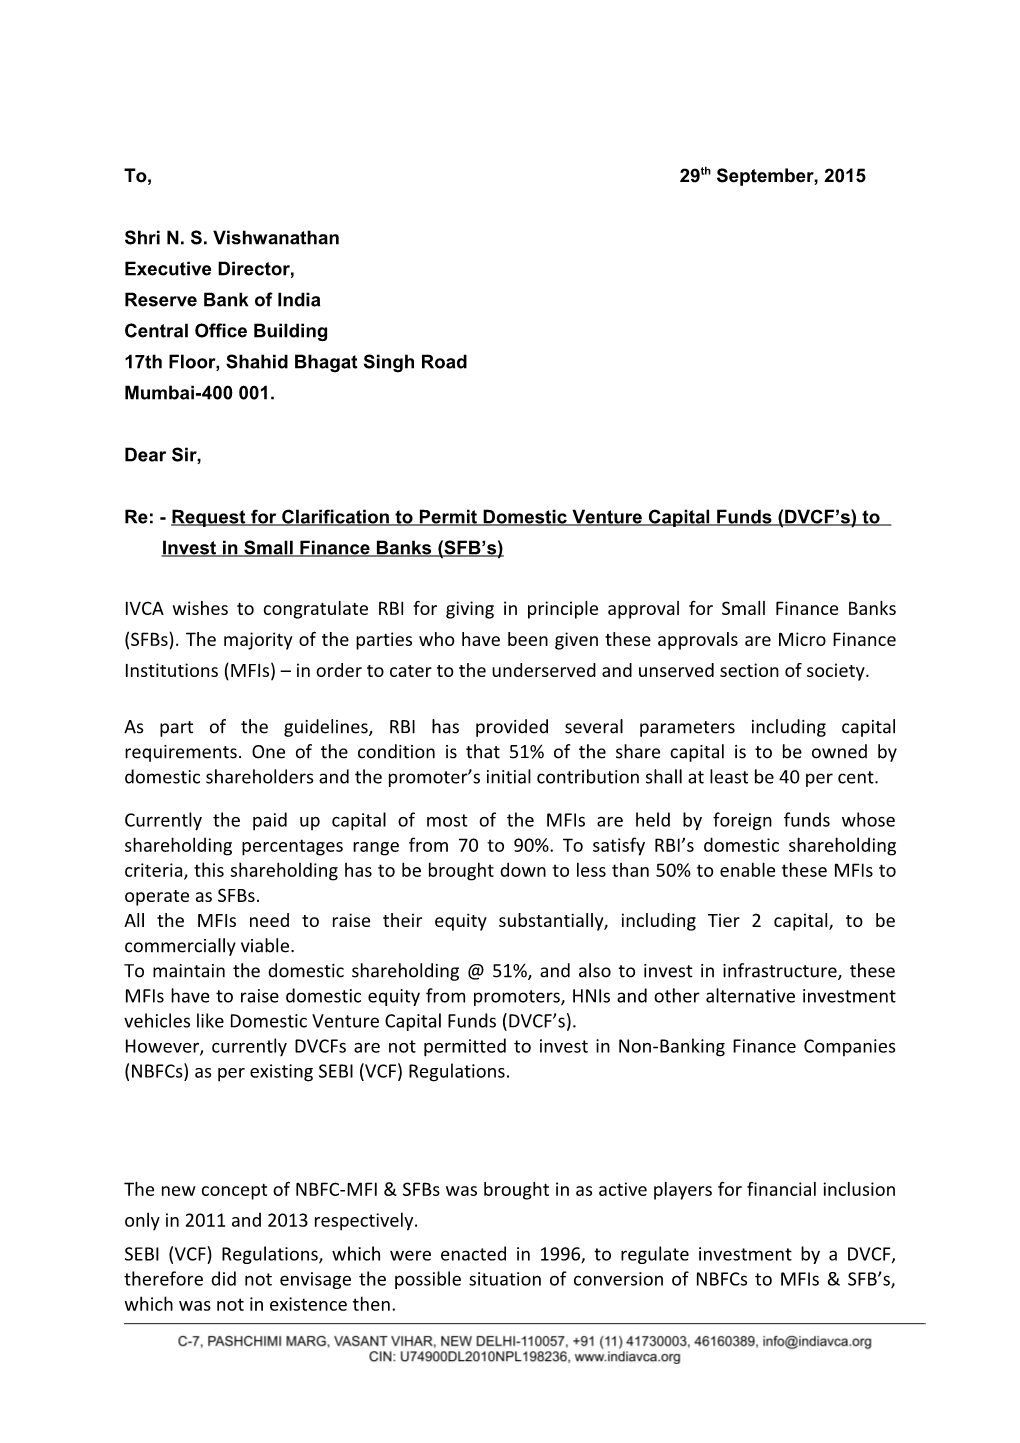 Re: - Request for Clarification to Permit Domestic Venture Capital Funds (DVCF S) To